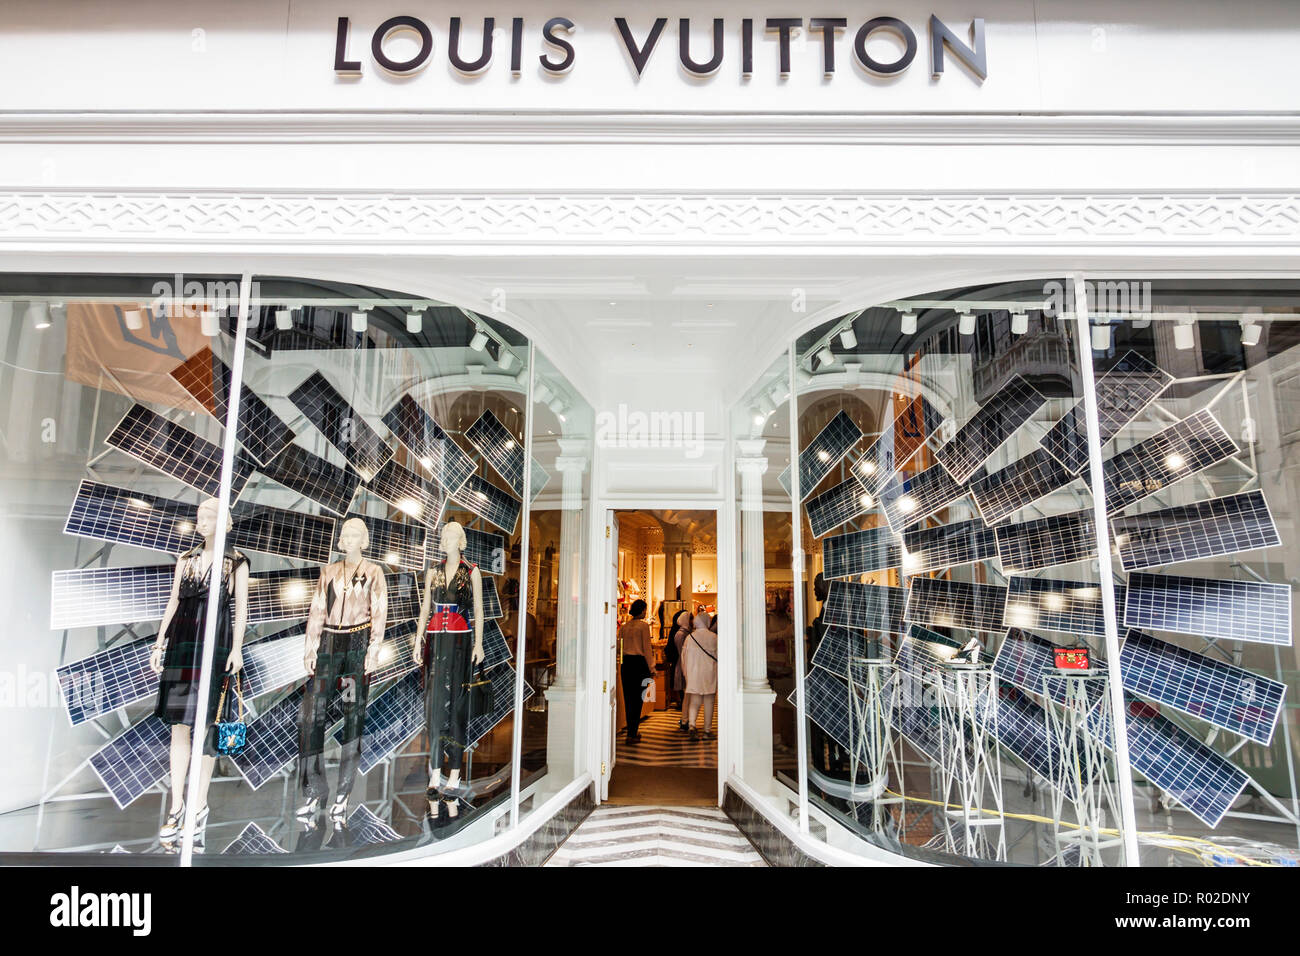 London England United Kingdom Great Britain Mayfair shopping Louis Vuitton store front entrance ...